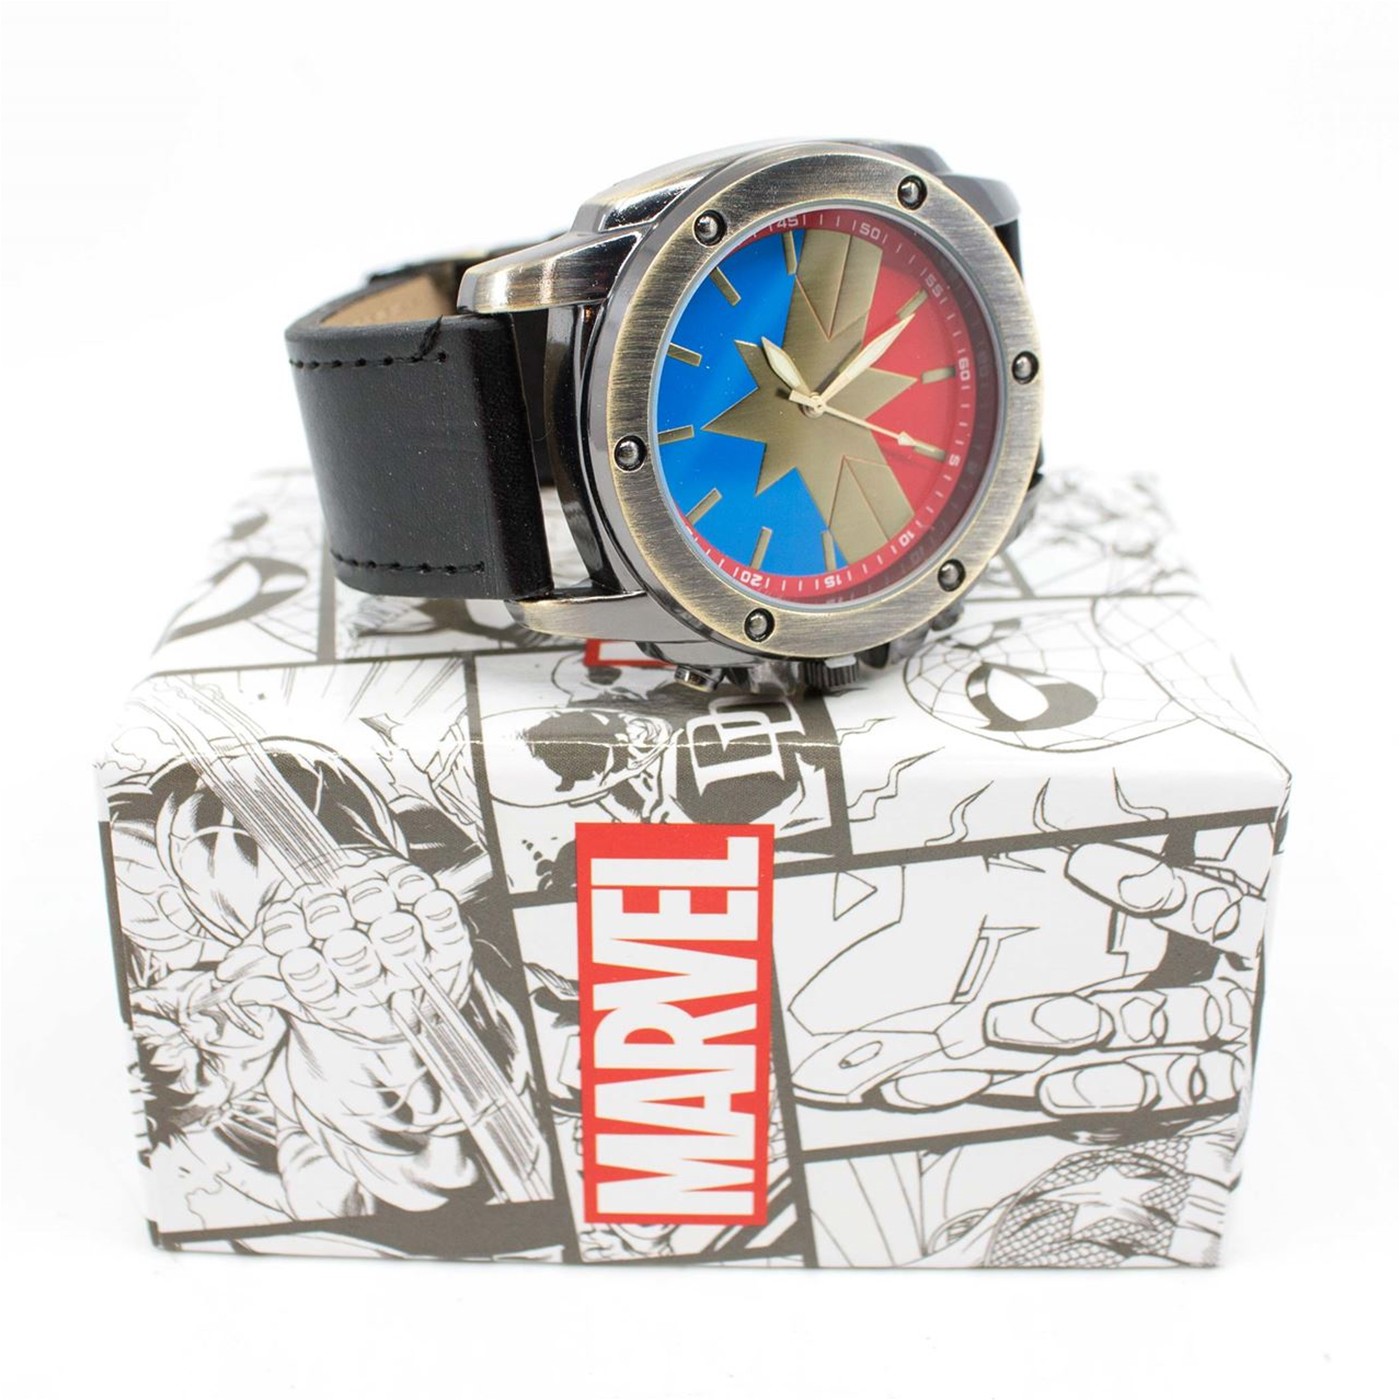 Captain Marvel Symbol Watch with Adjustable Strap